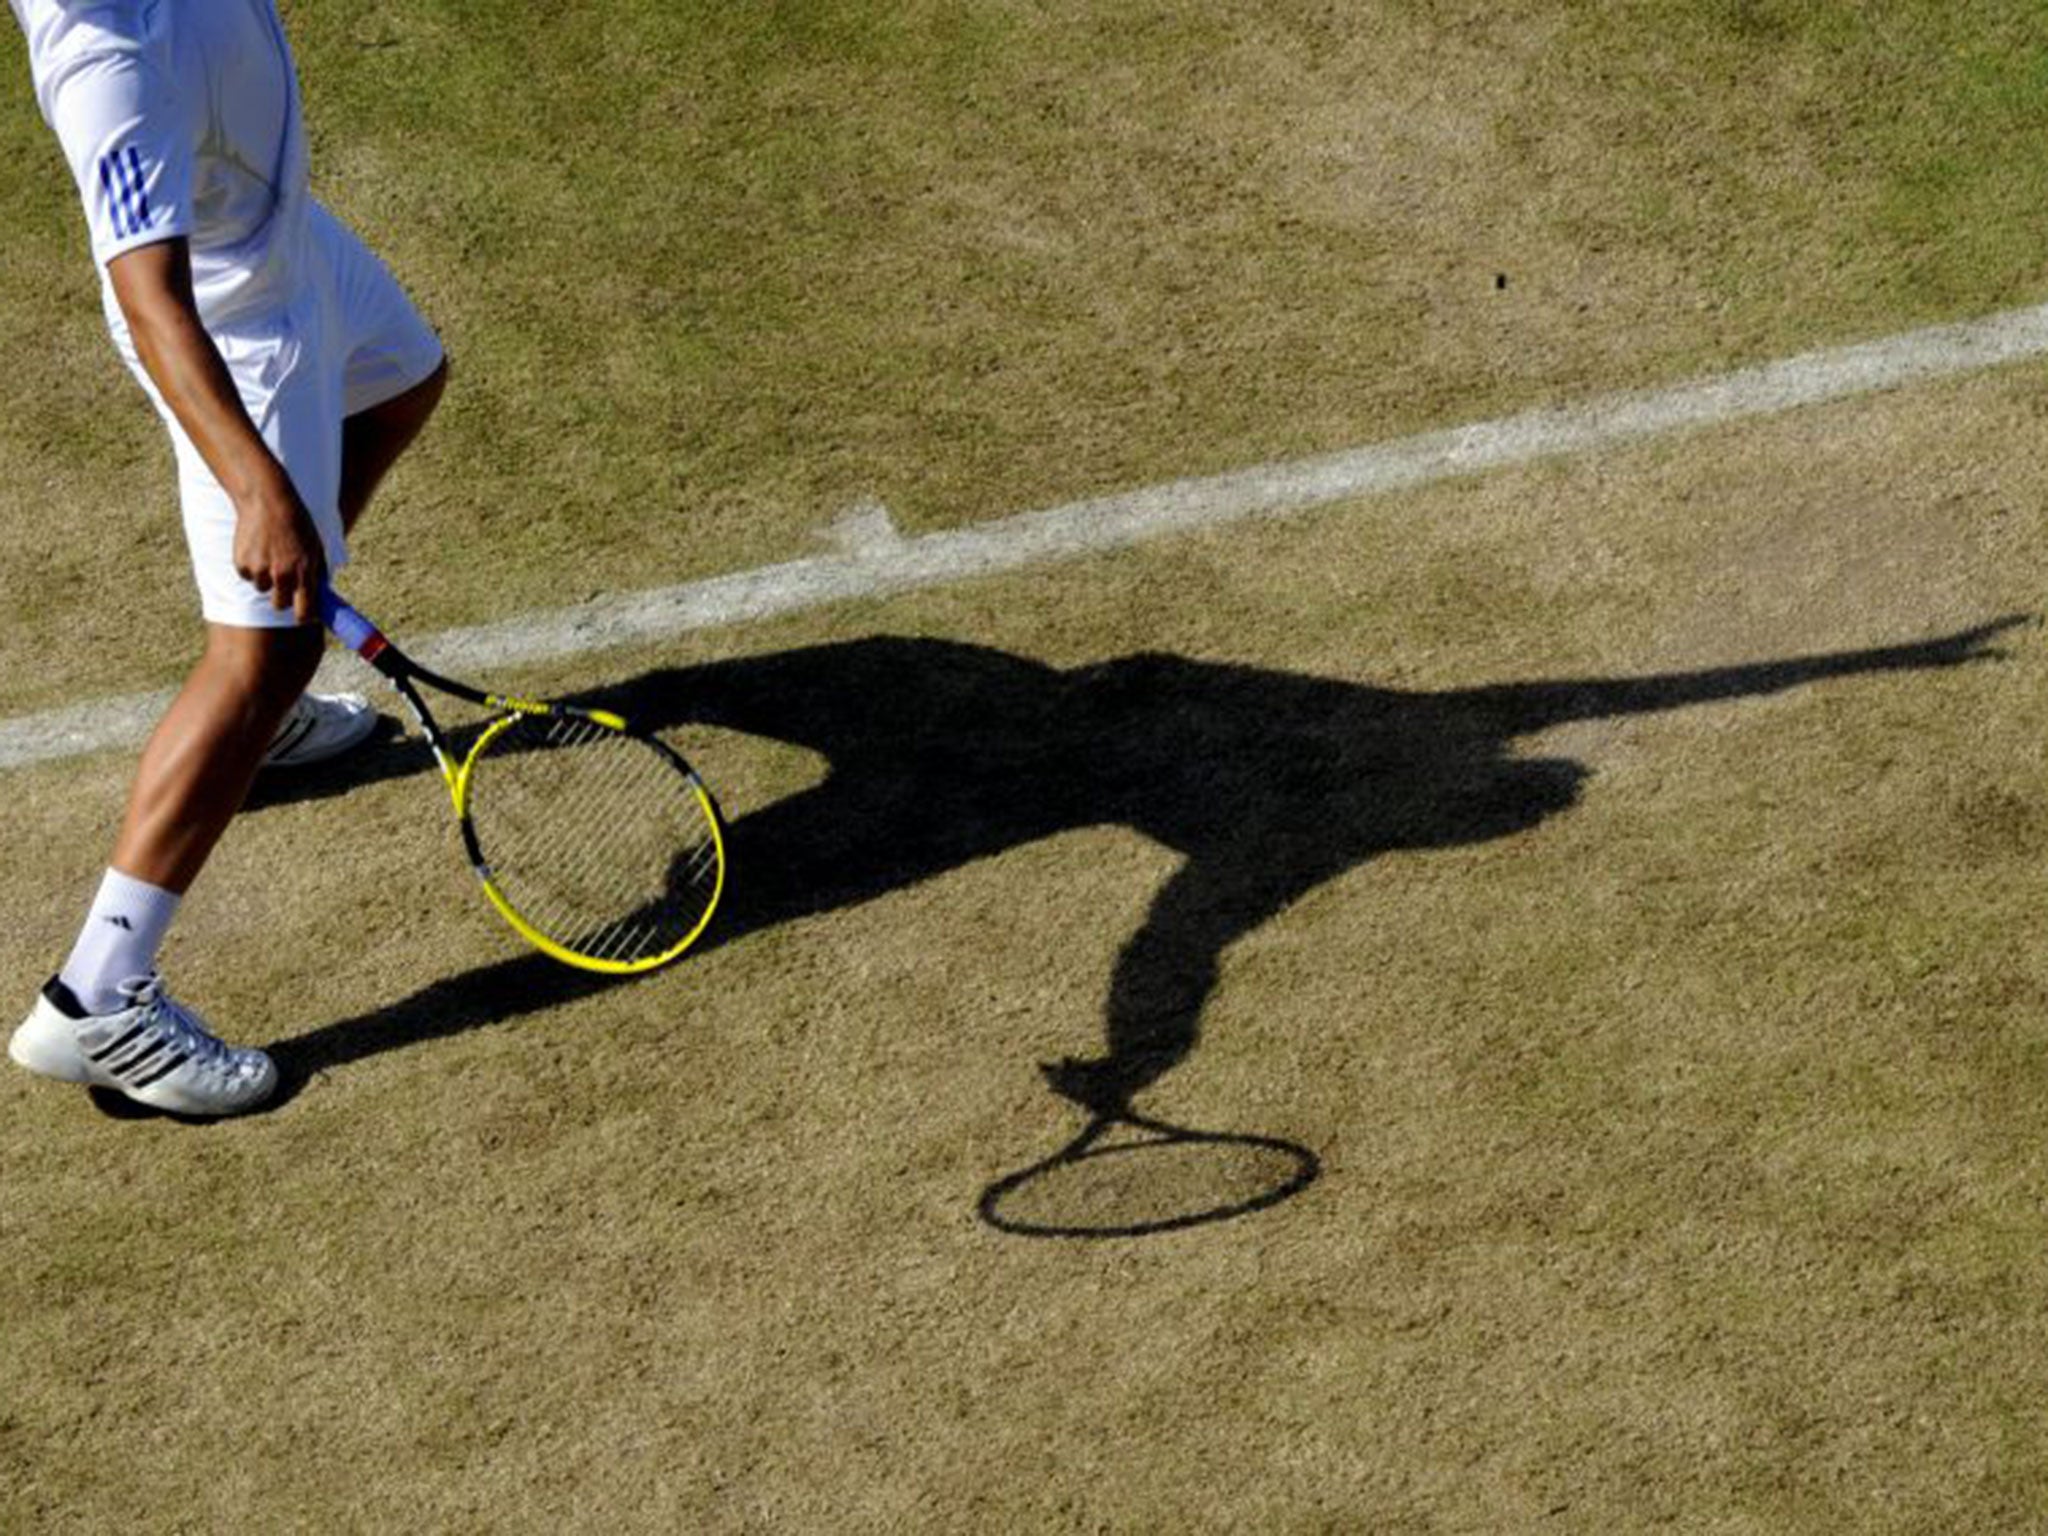 Secret files have been revealed which allegedly contain evidence of widespread match fixing at the top levels of world tennis